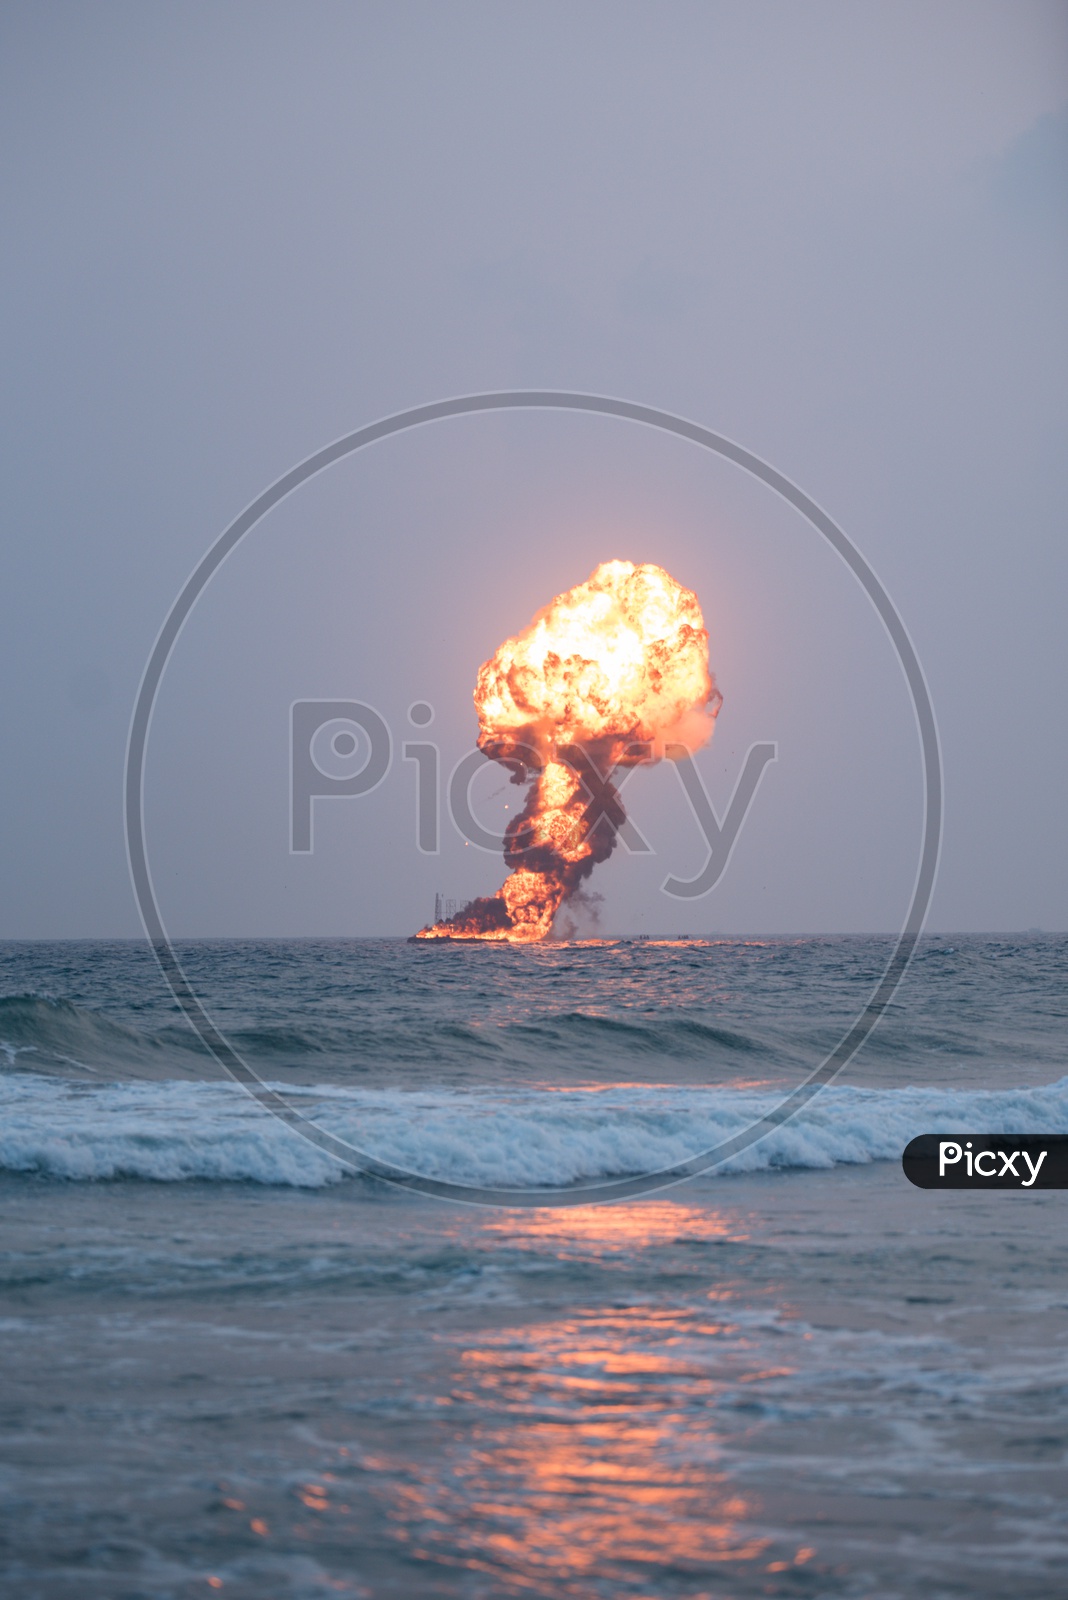 Explosion of a Dummy target by Indian Navy at a demonstration during Indian Navy Day celebrations in Visakhapatnam